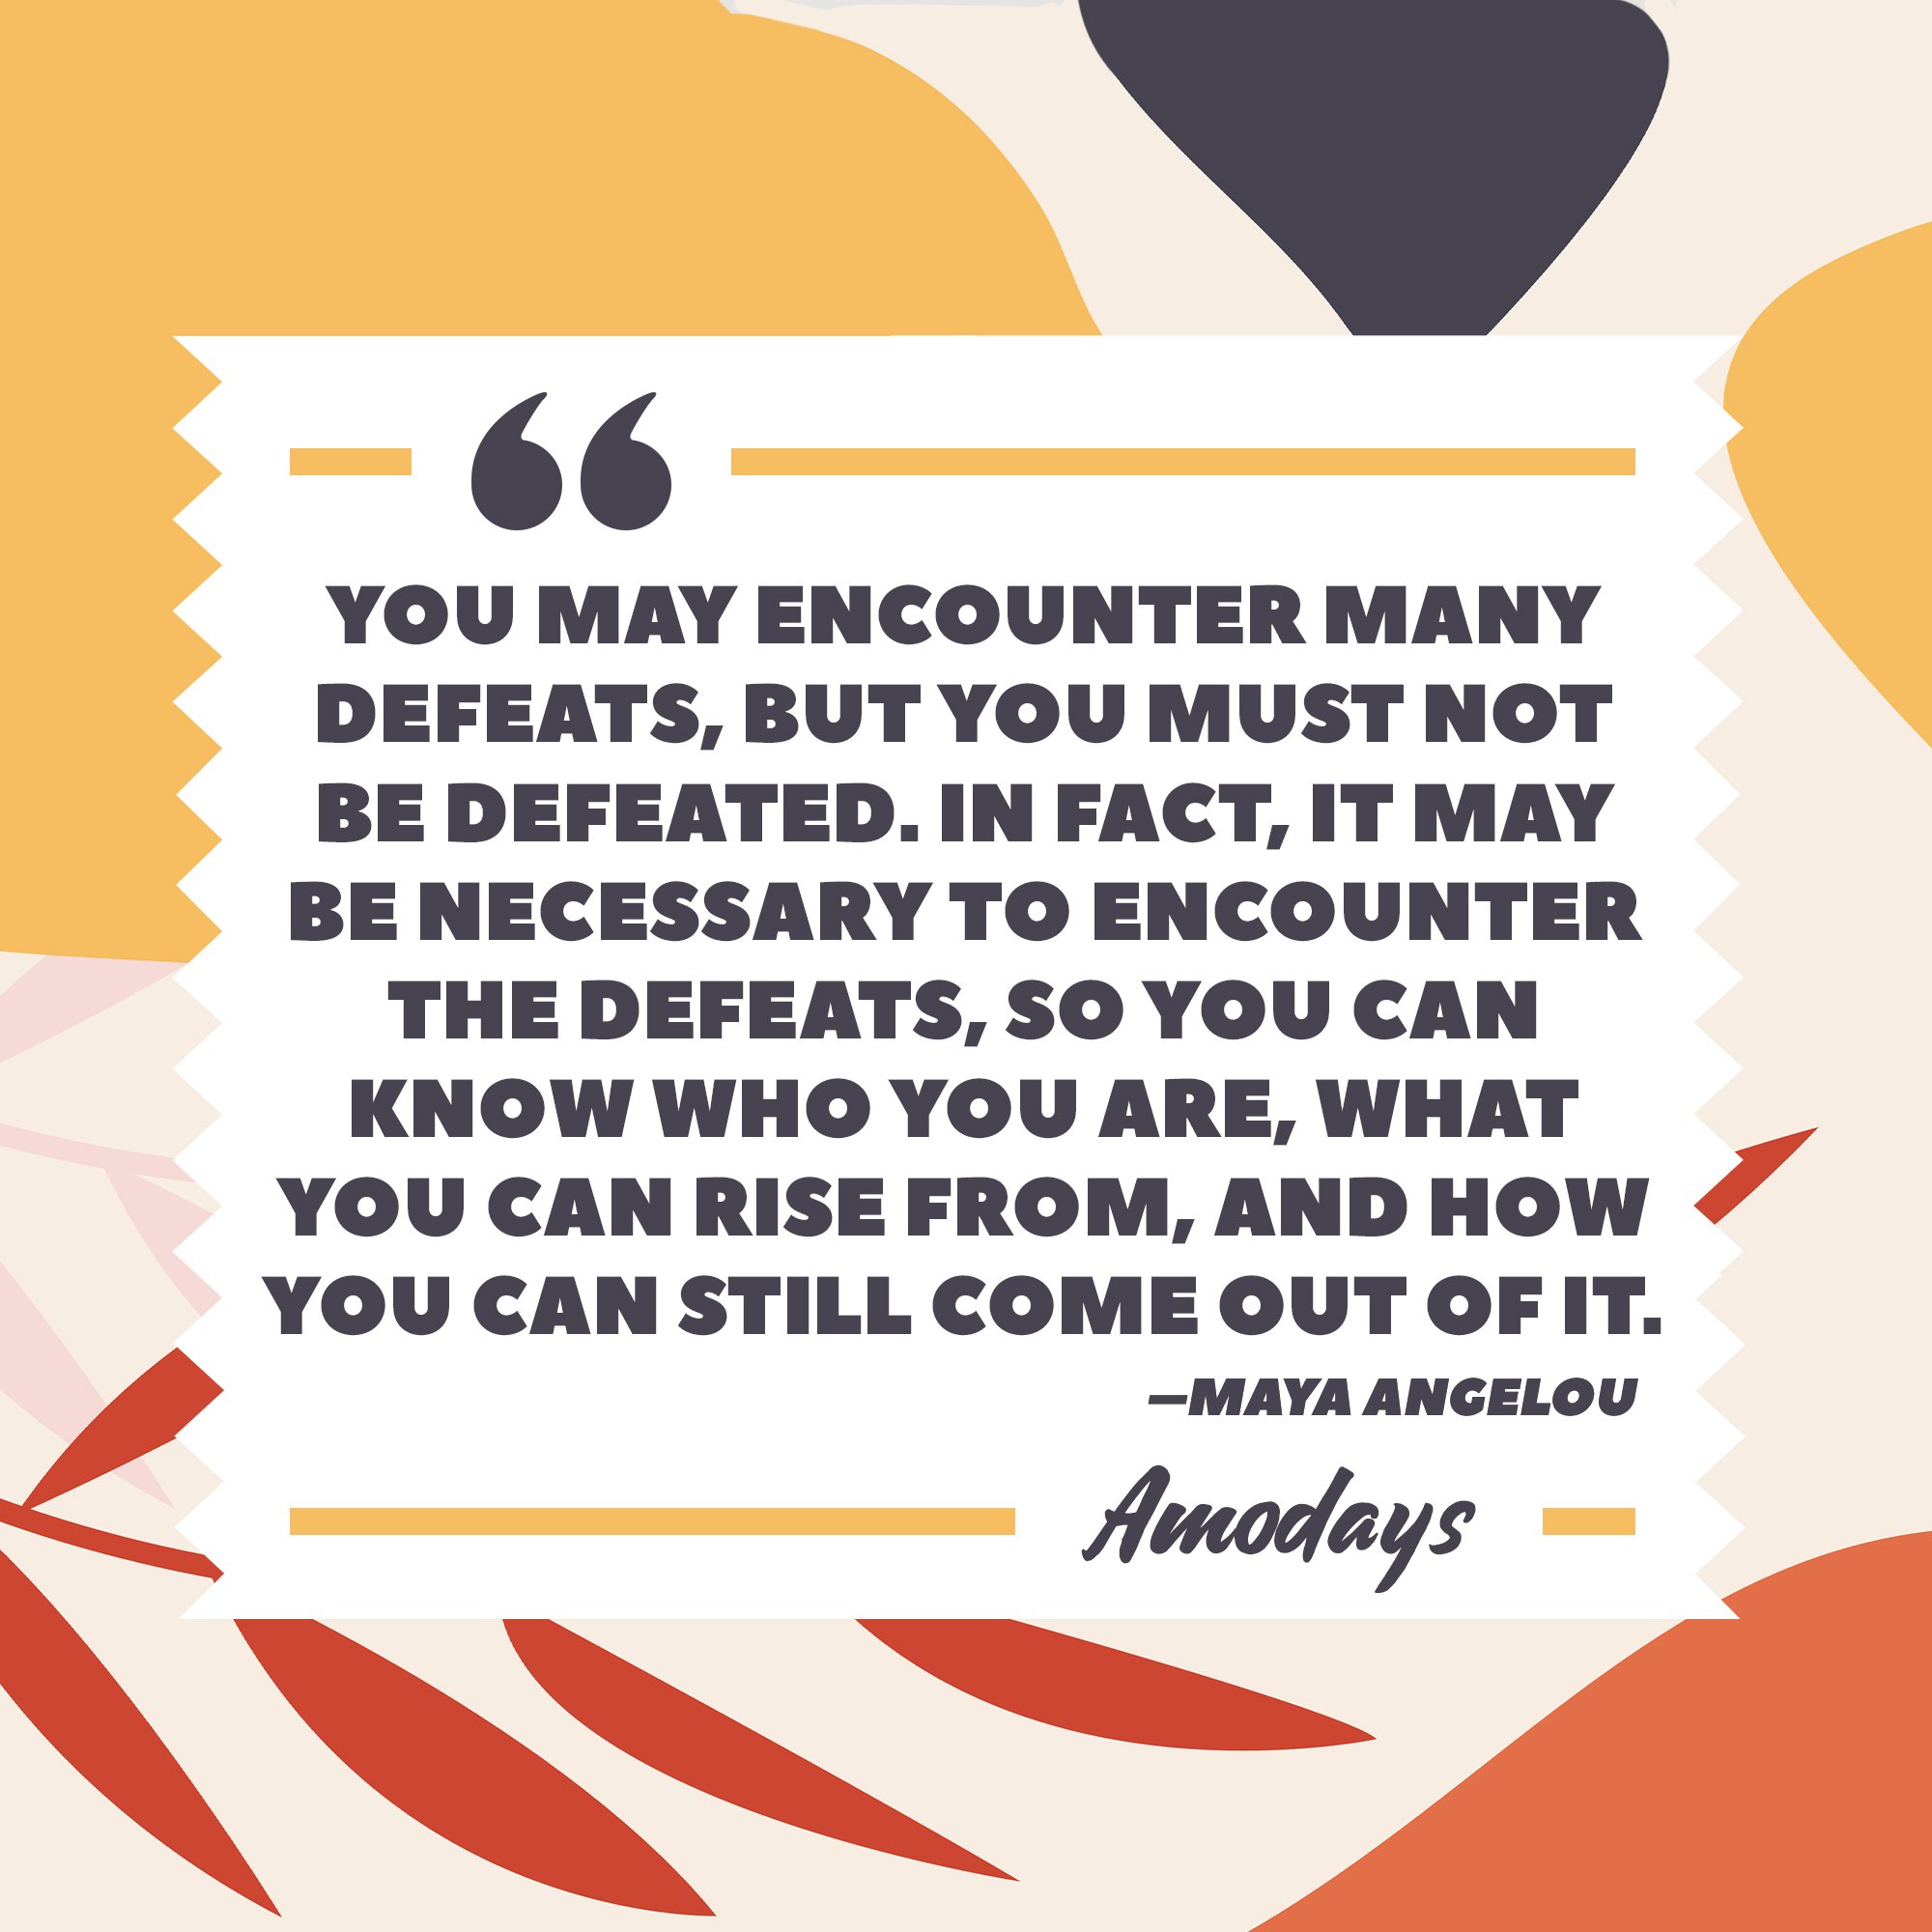 Maya Angelou's quote “You may encounter many defeats, but you must not be defeated. In fact, it may be necessary to encounter the defeats, so you can know who you are, what you can rise from, and how you can still come out of it.” | Image: AmoDays 